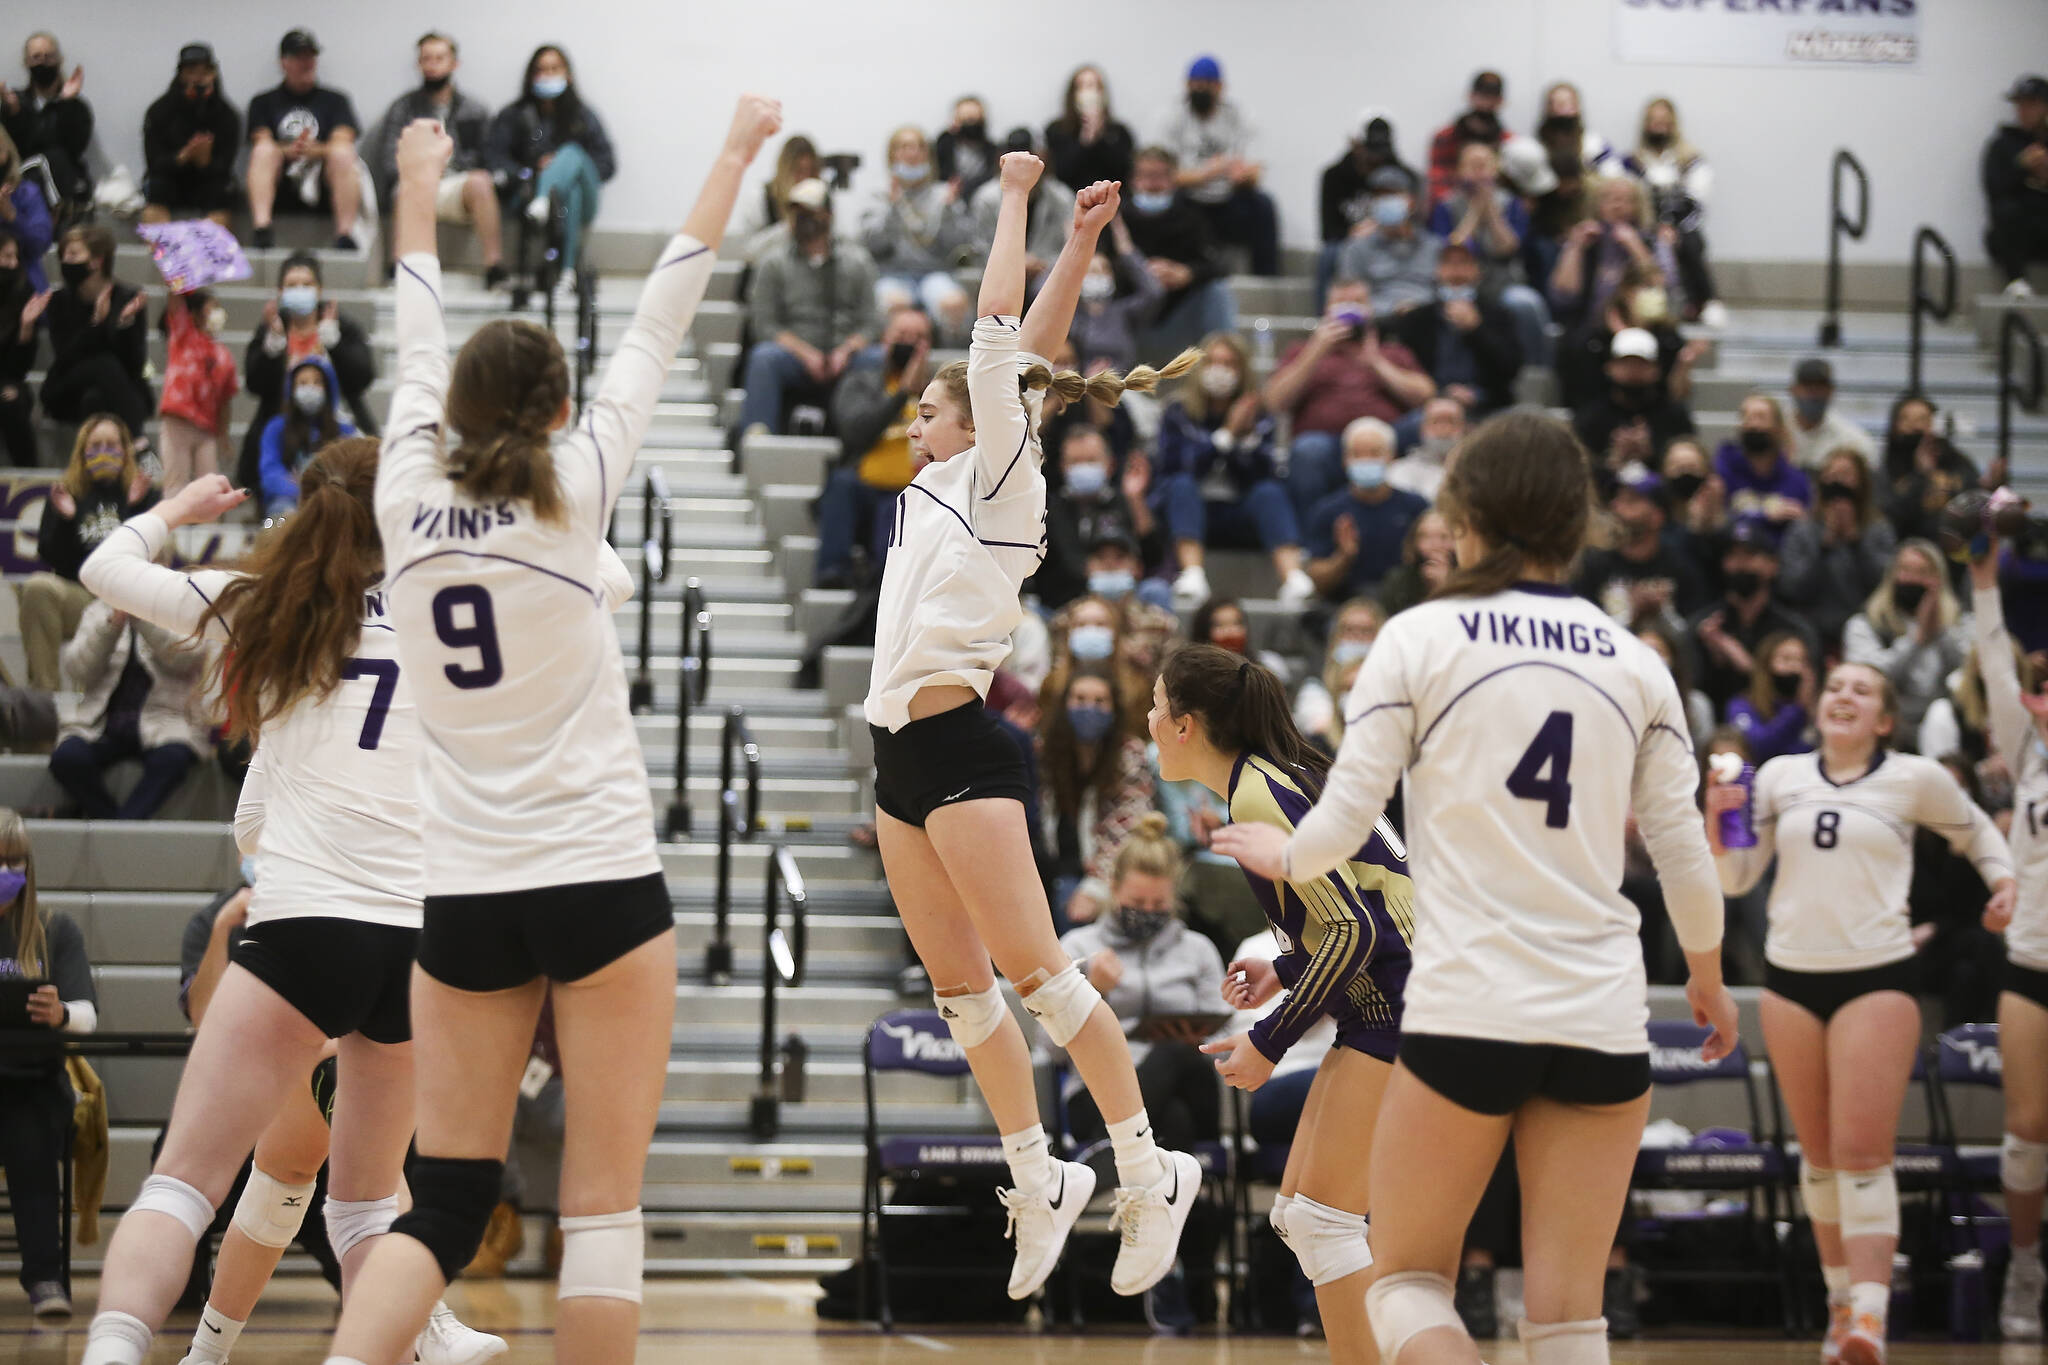 Lake Stevens cheer after a point in the first game as the Vikings beat Mount Si in five sets in a Class 4A Wes-King Bi-District tournament semifinal volleyball matchup Tuesday in Lake Stevens. (Andy Bronson / The Herald)